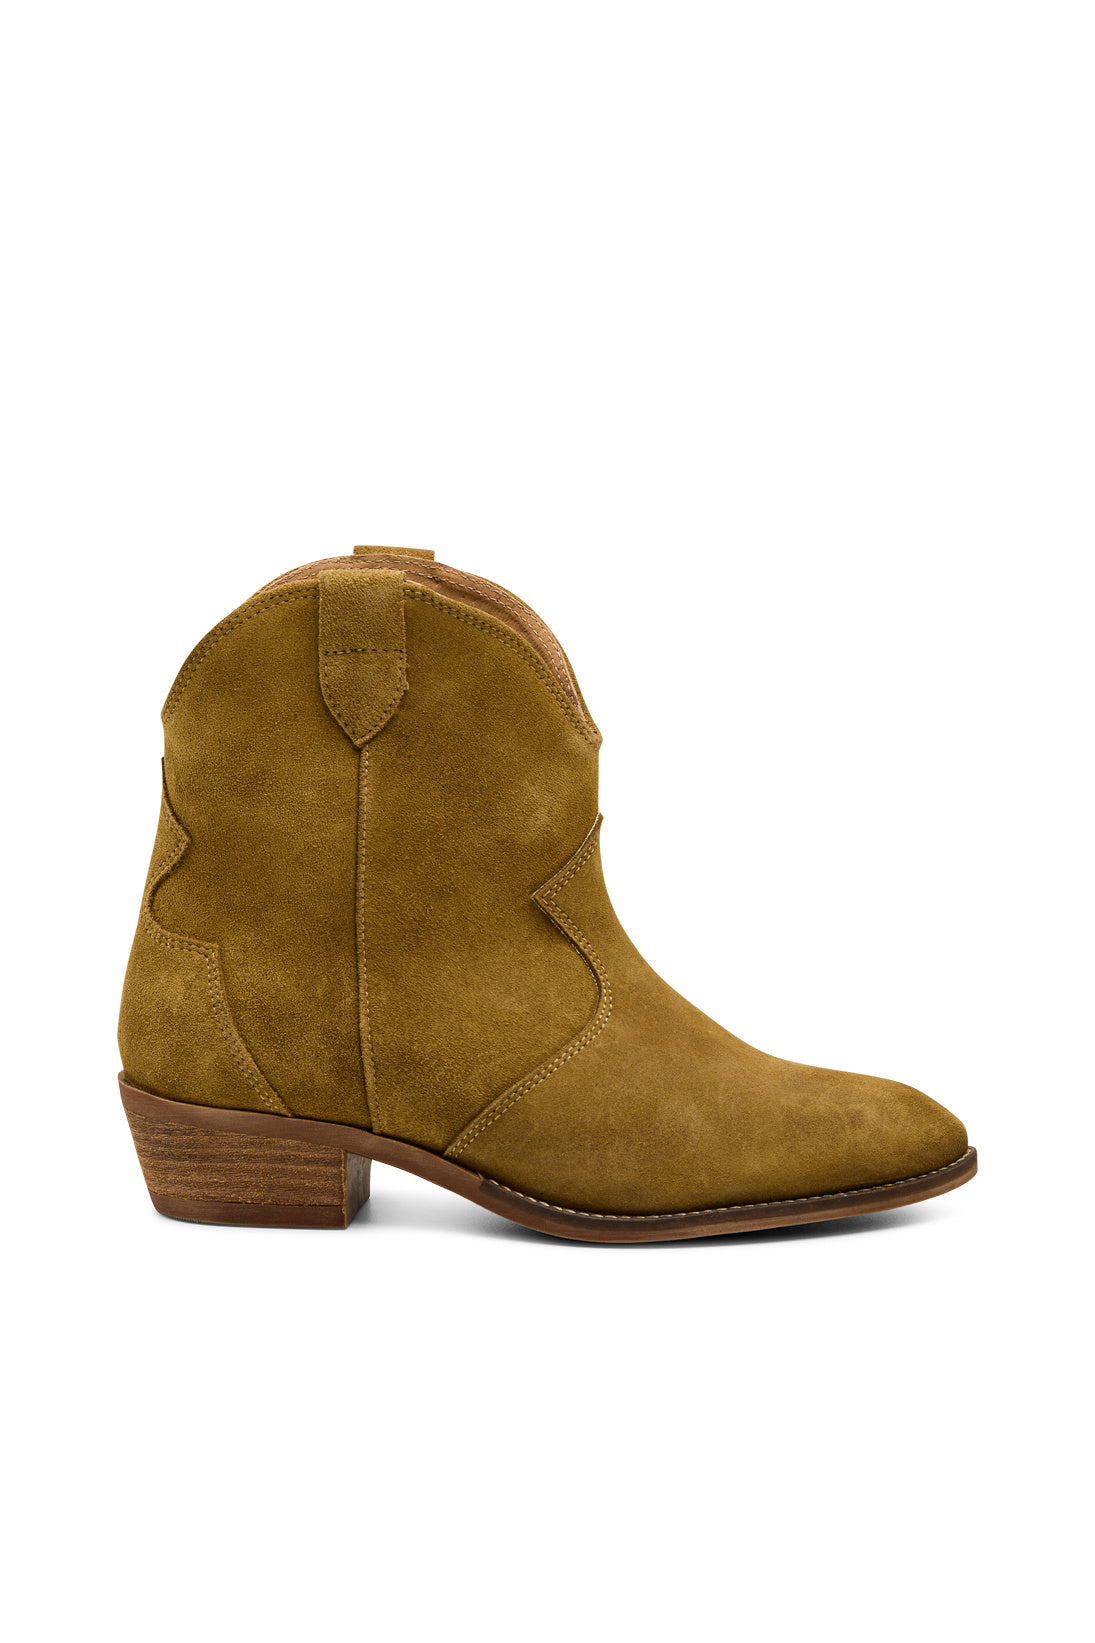 Clarice Leather Boot - Khaki Suede